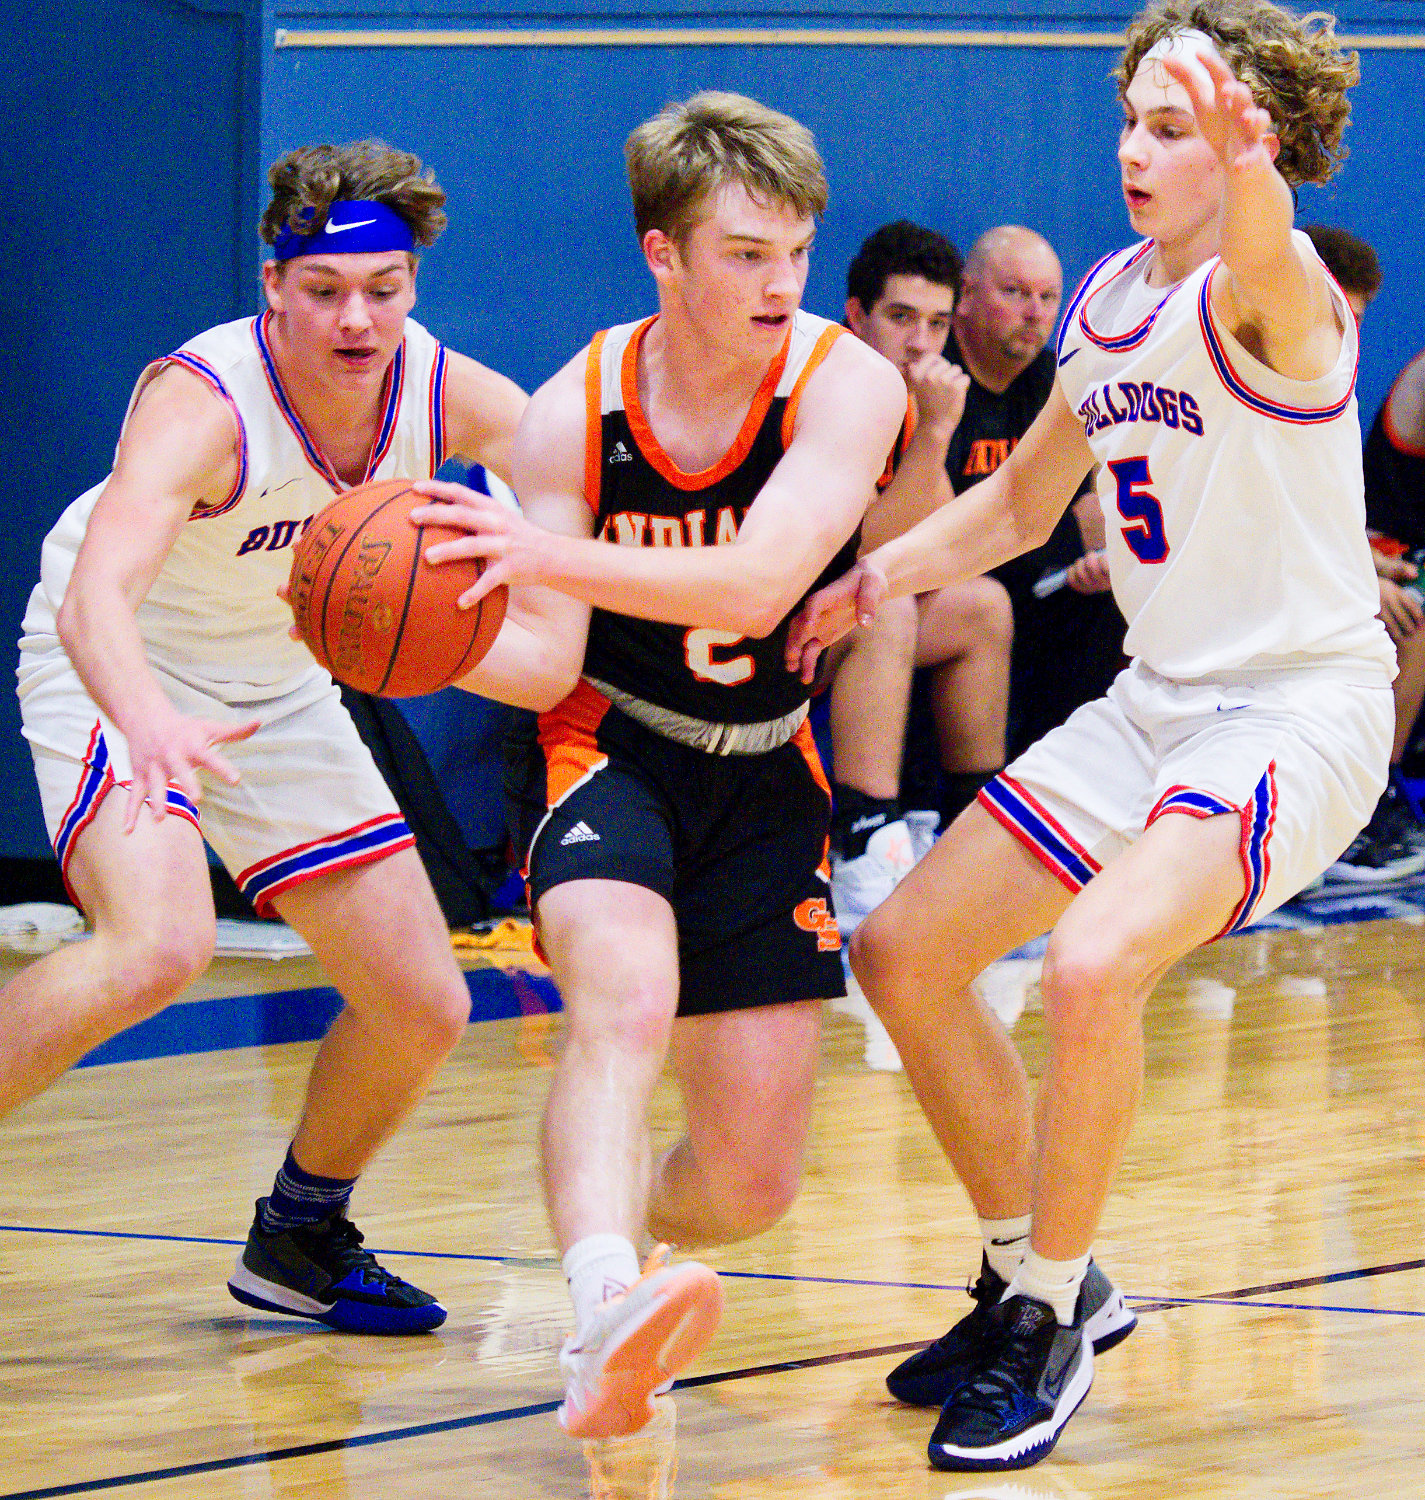 Garin Kisinger and Brady Floyd apply defensive pressure to the Grand Saline ball handler. [see more holiday hoops]